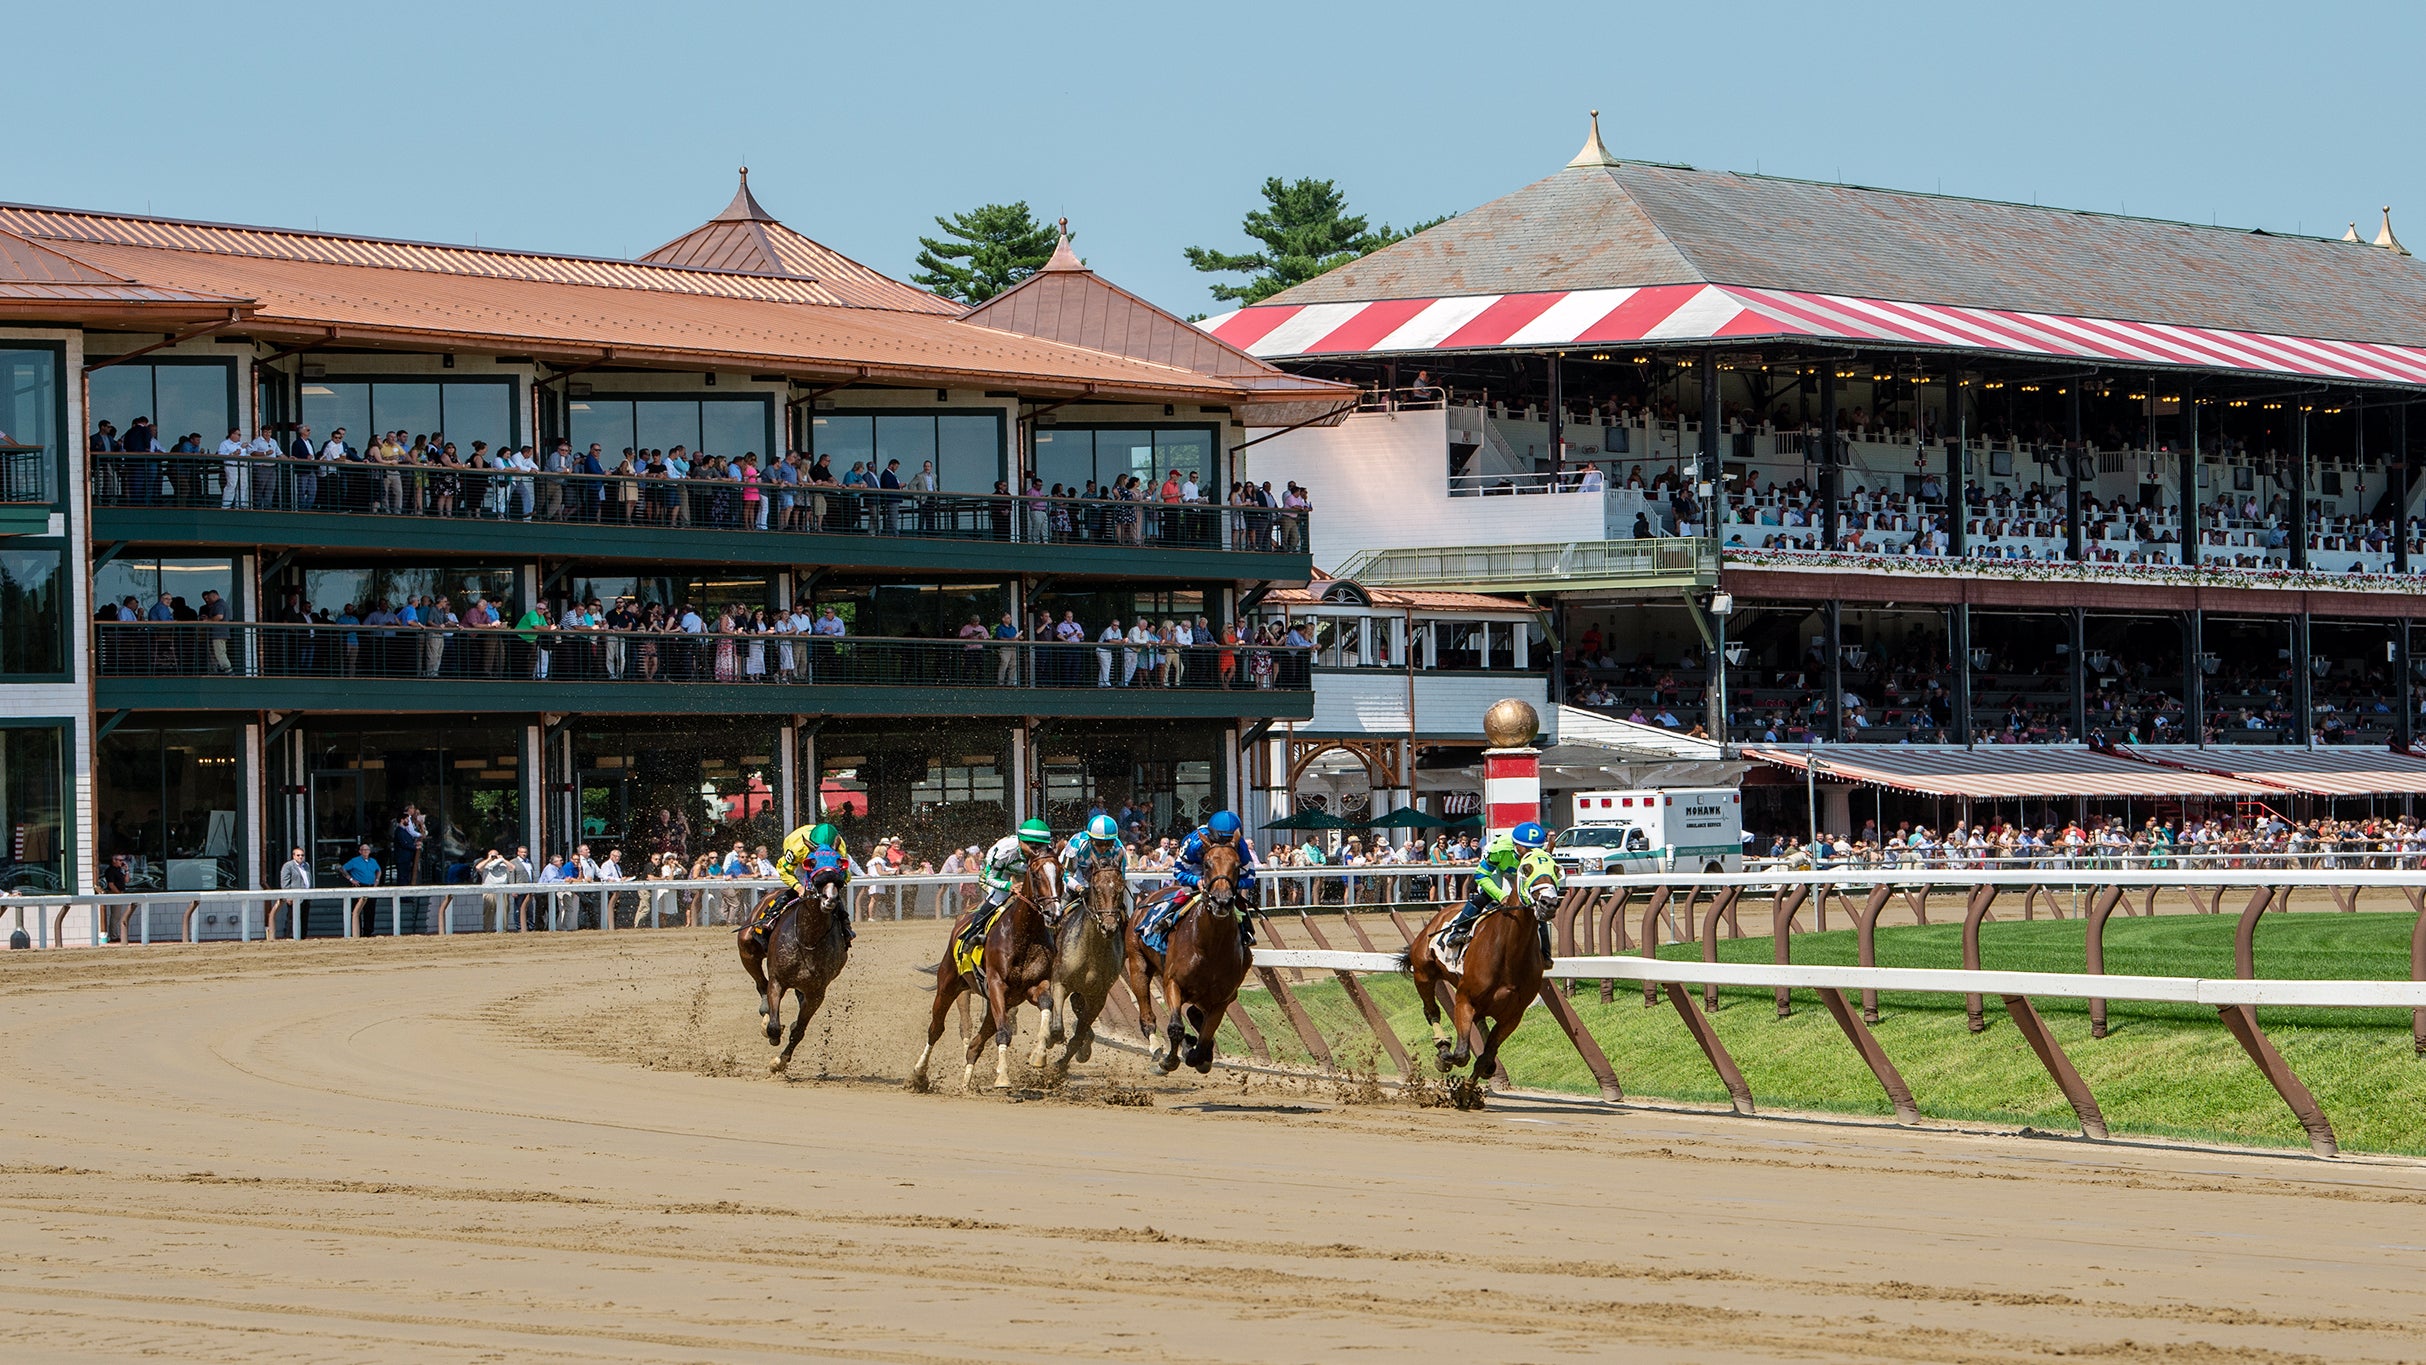 The Cutwater Stretch in Saratoga Springs promo photo for Exclusive presale offer code